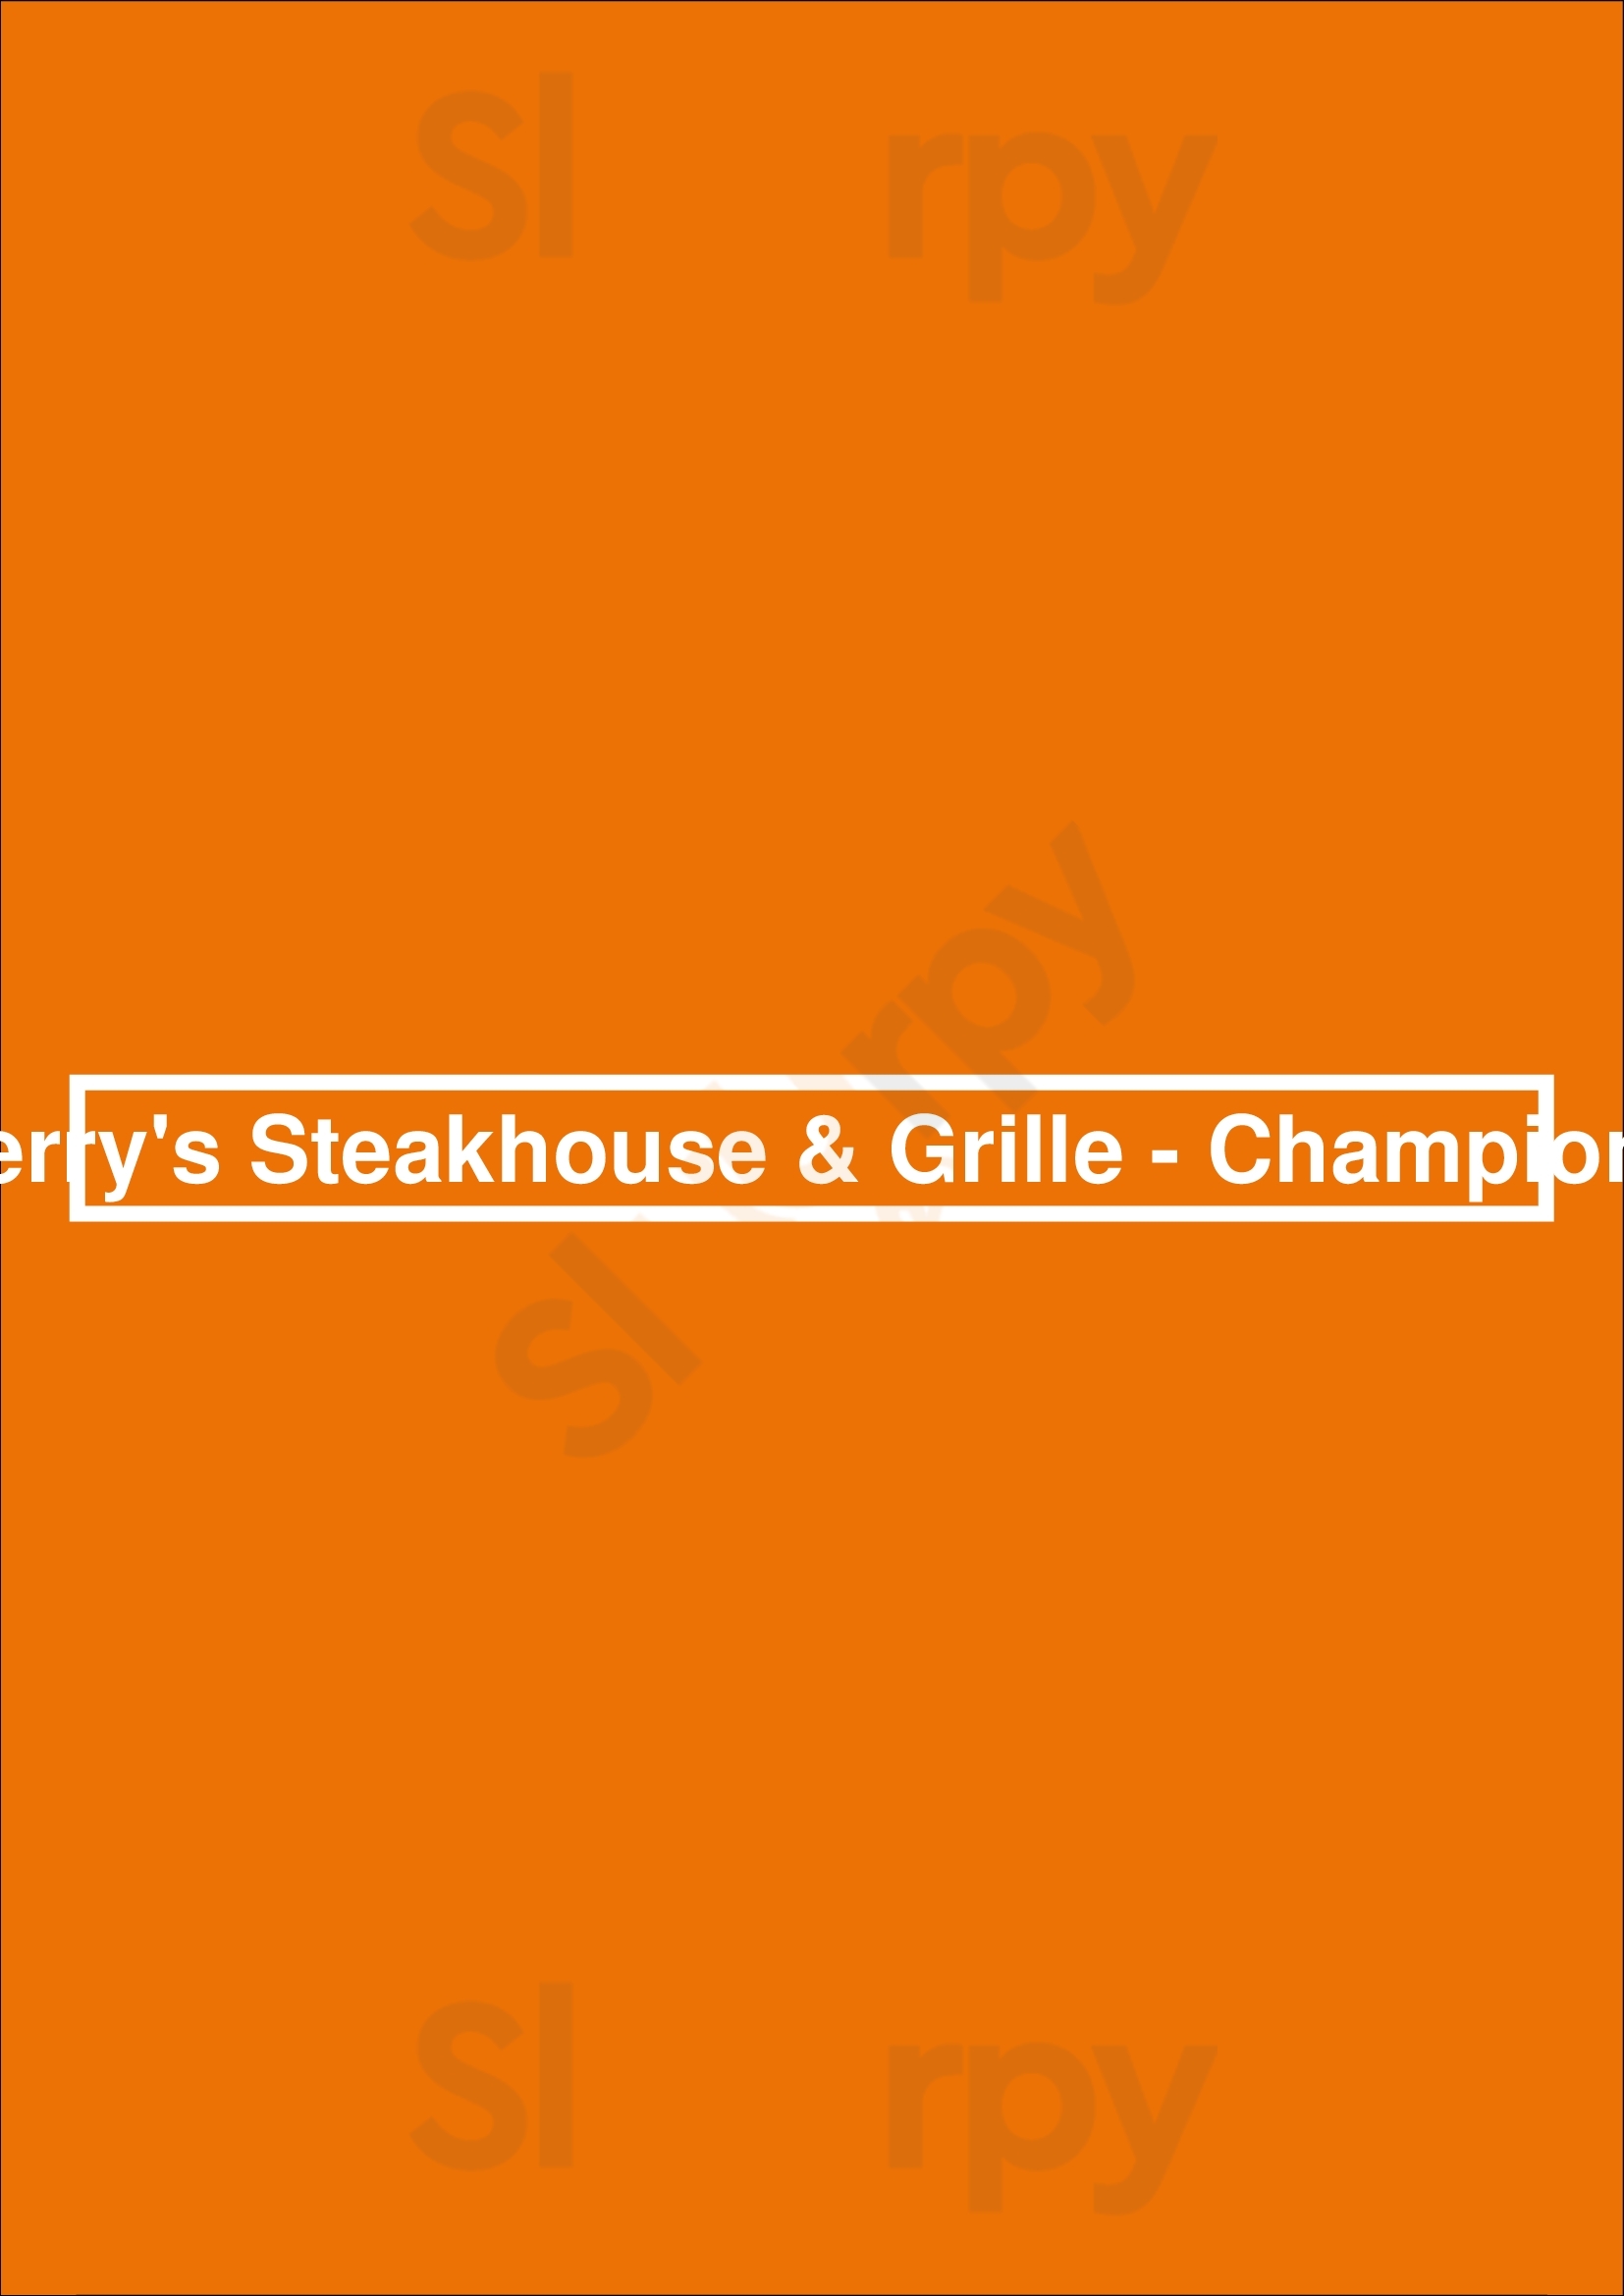 Perry's Steakhouse & Grille - Champions Houston Menu - 1